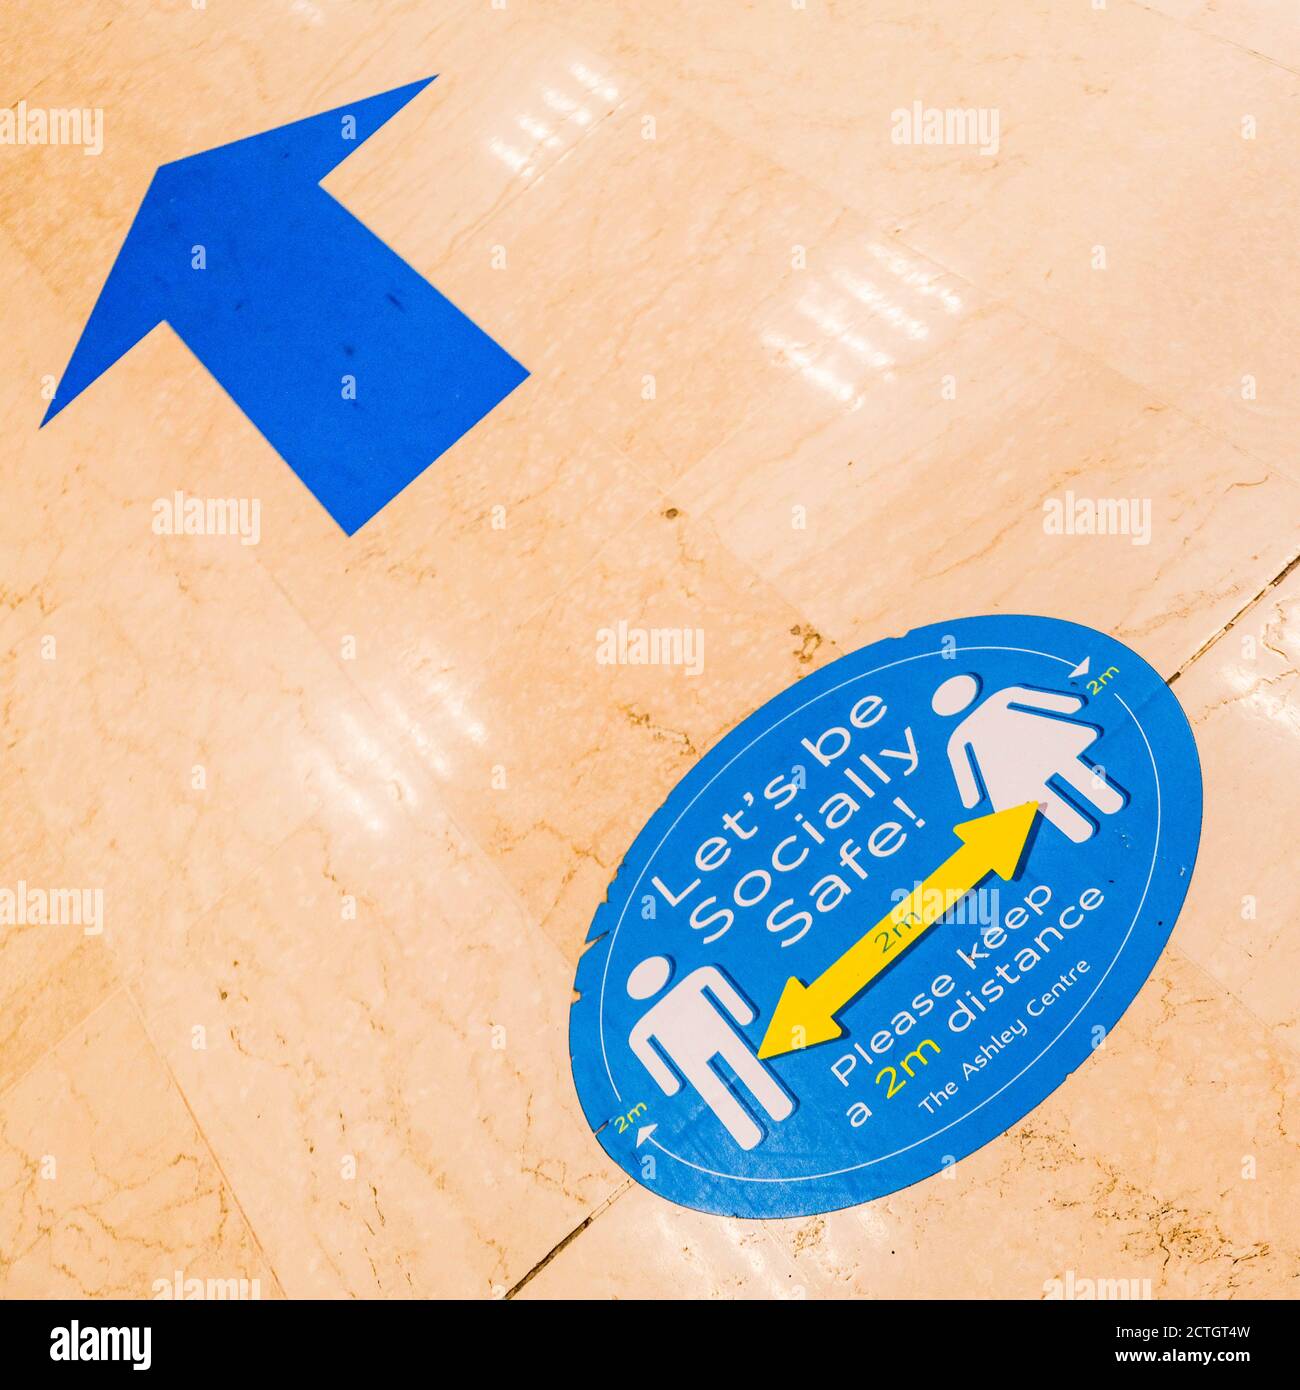 COVID-19 Public Social Distancing Safety Floor Markers With No People Stock Photo